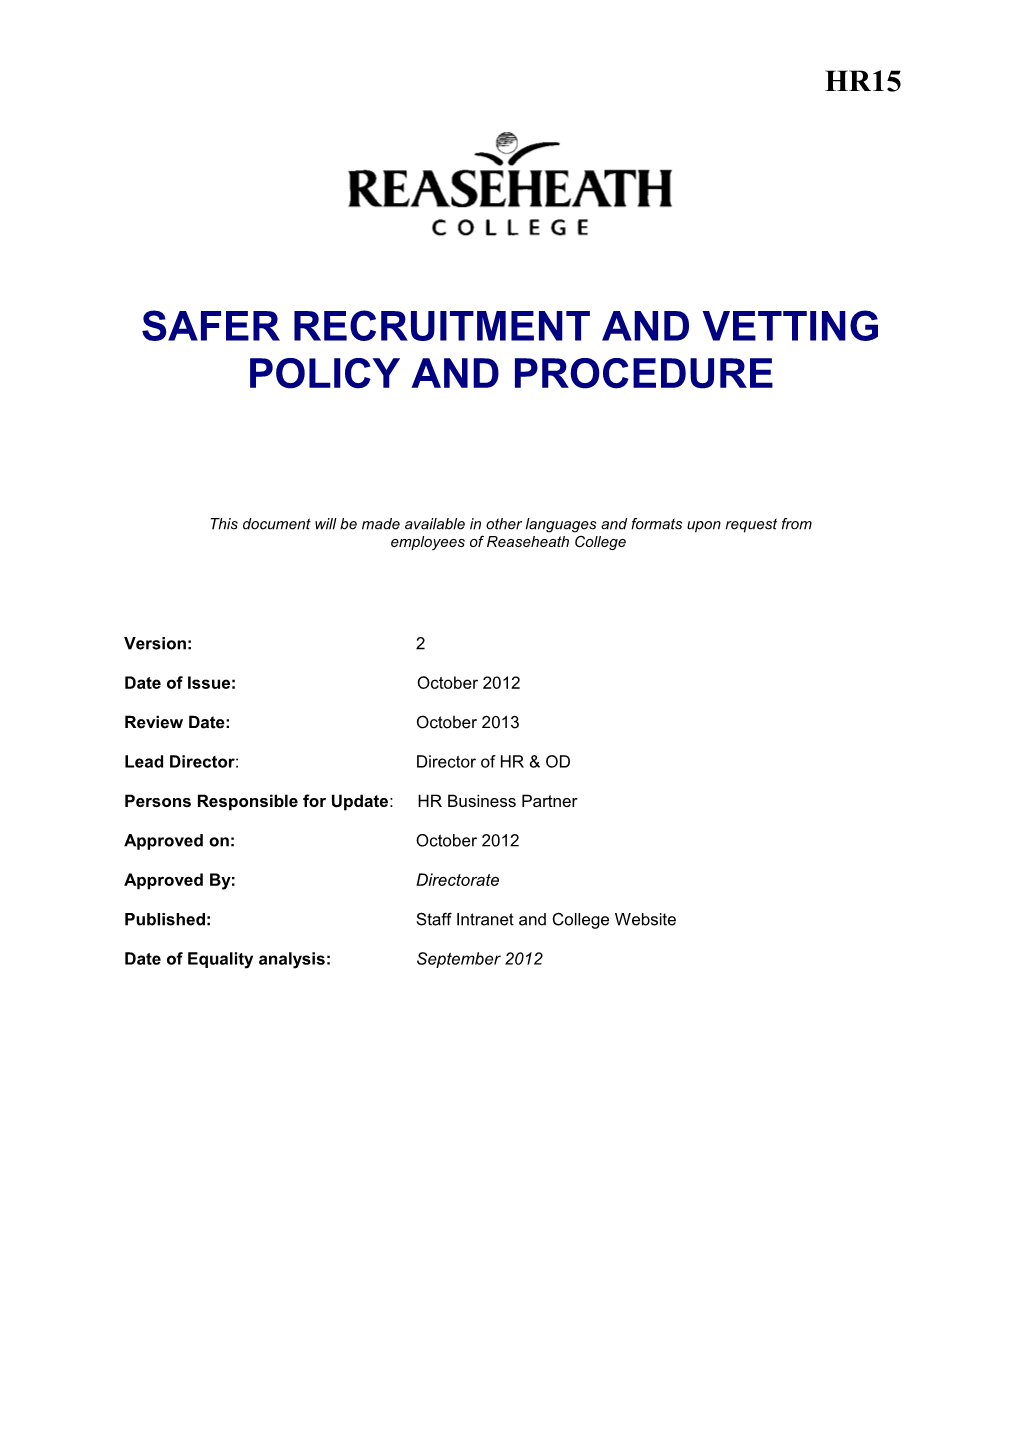 Safer Recruitment and Vetting Policy and Procedure